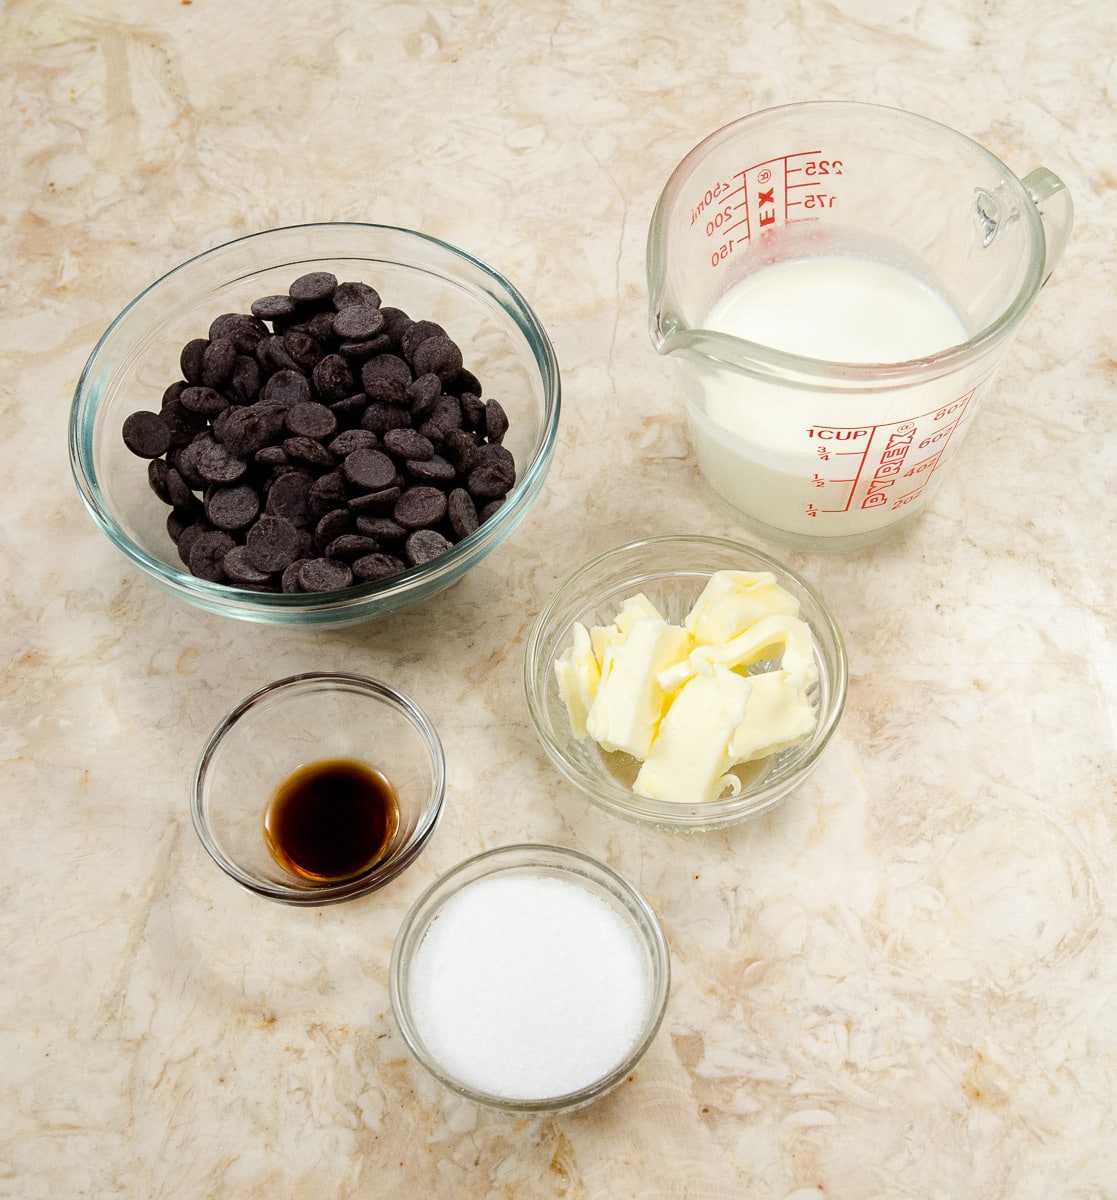 Ingredients for the chocolate centers include semi sweet chocolate, heavy cream, vanilla, butter and granuated sugar